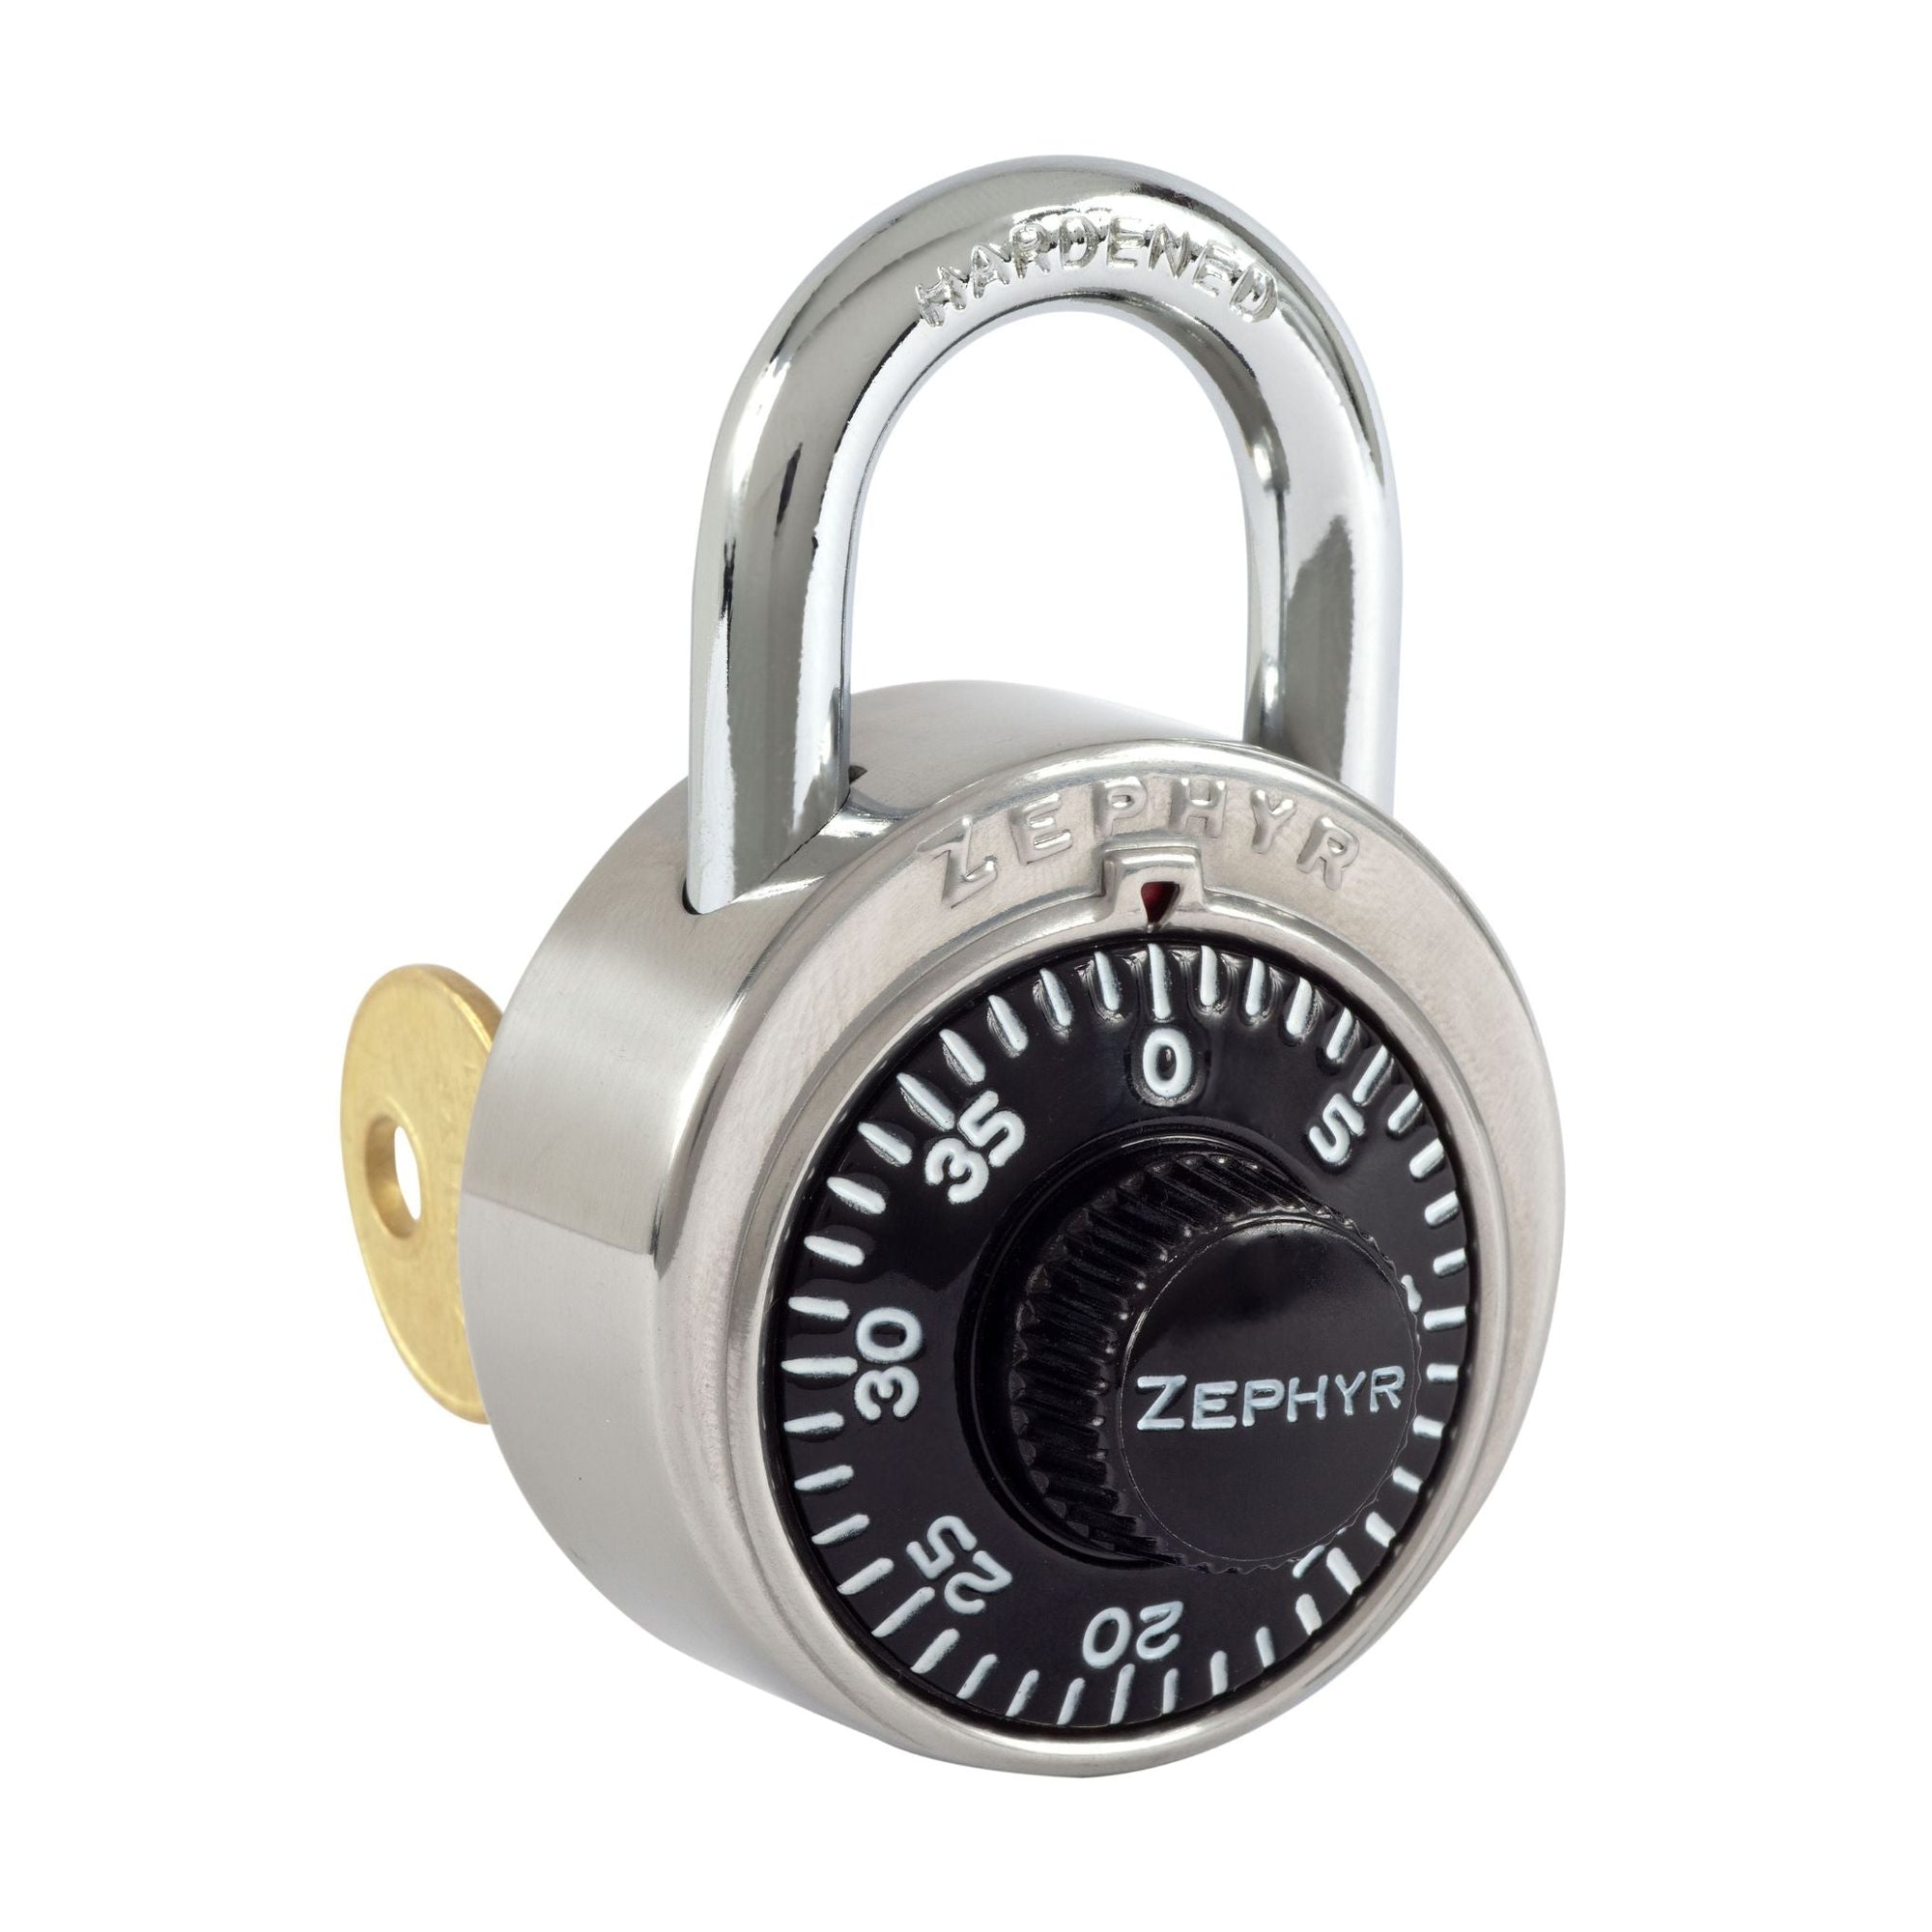 Zephyr Lock 1925 Combination Padlock Feature Stainless Steel Lock Body and Black Dial - The Lock Source